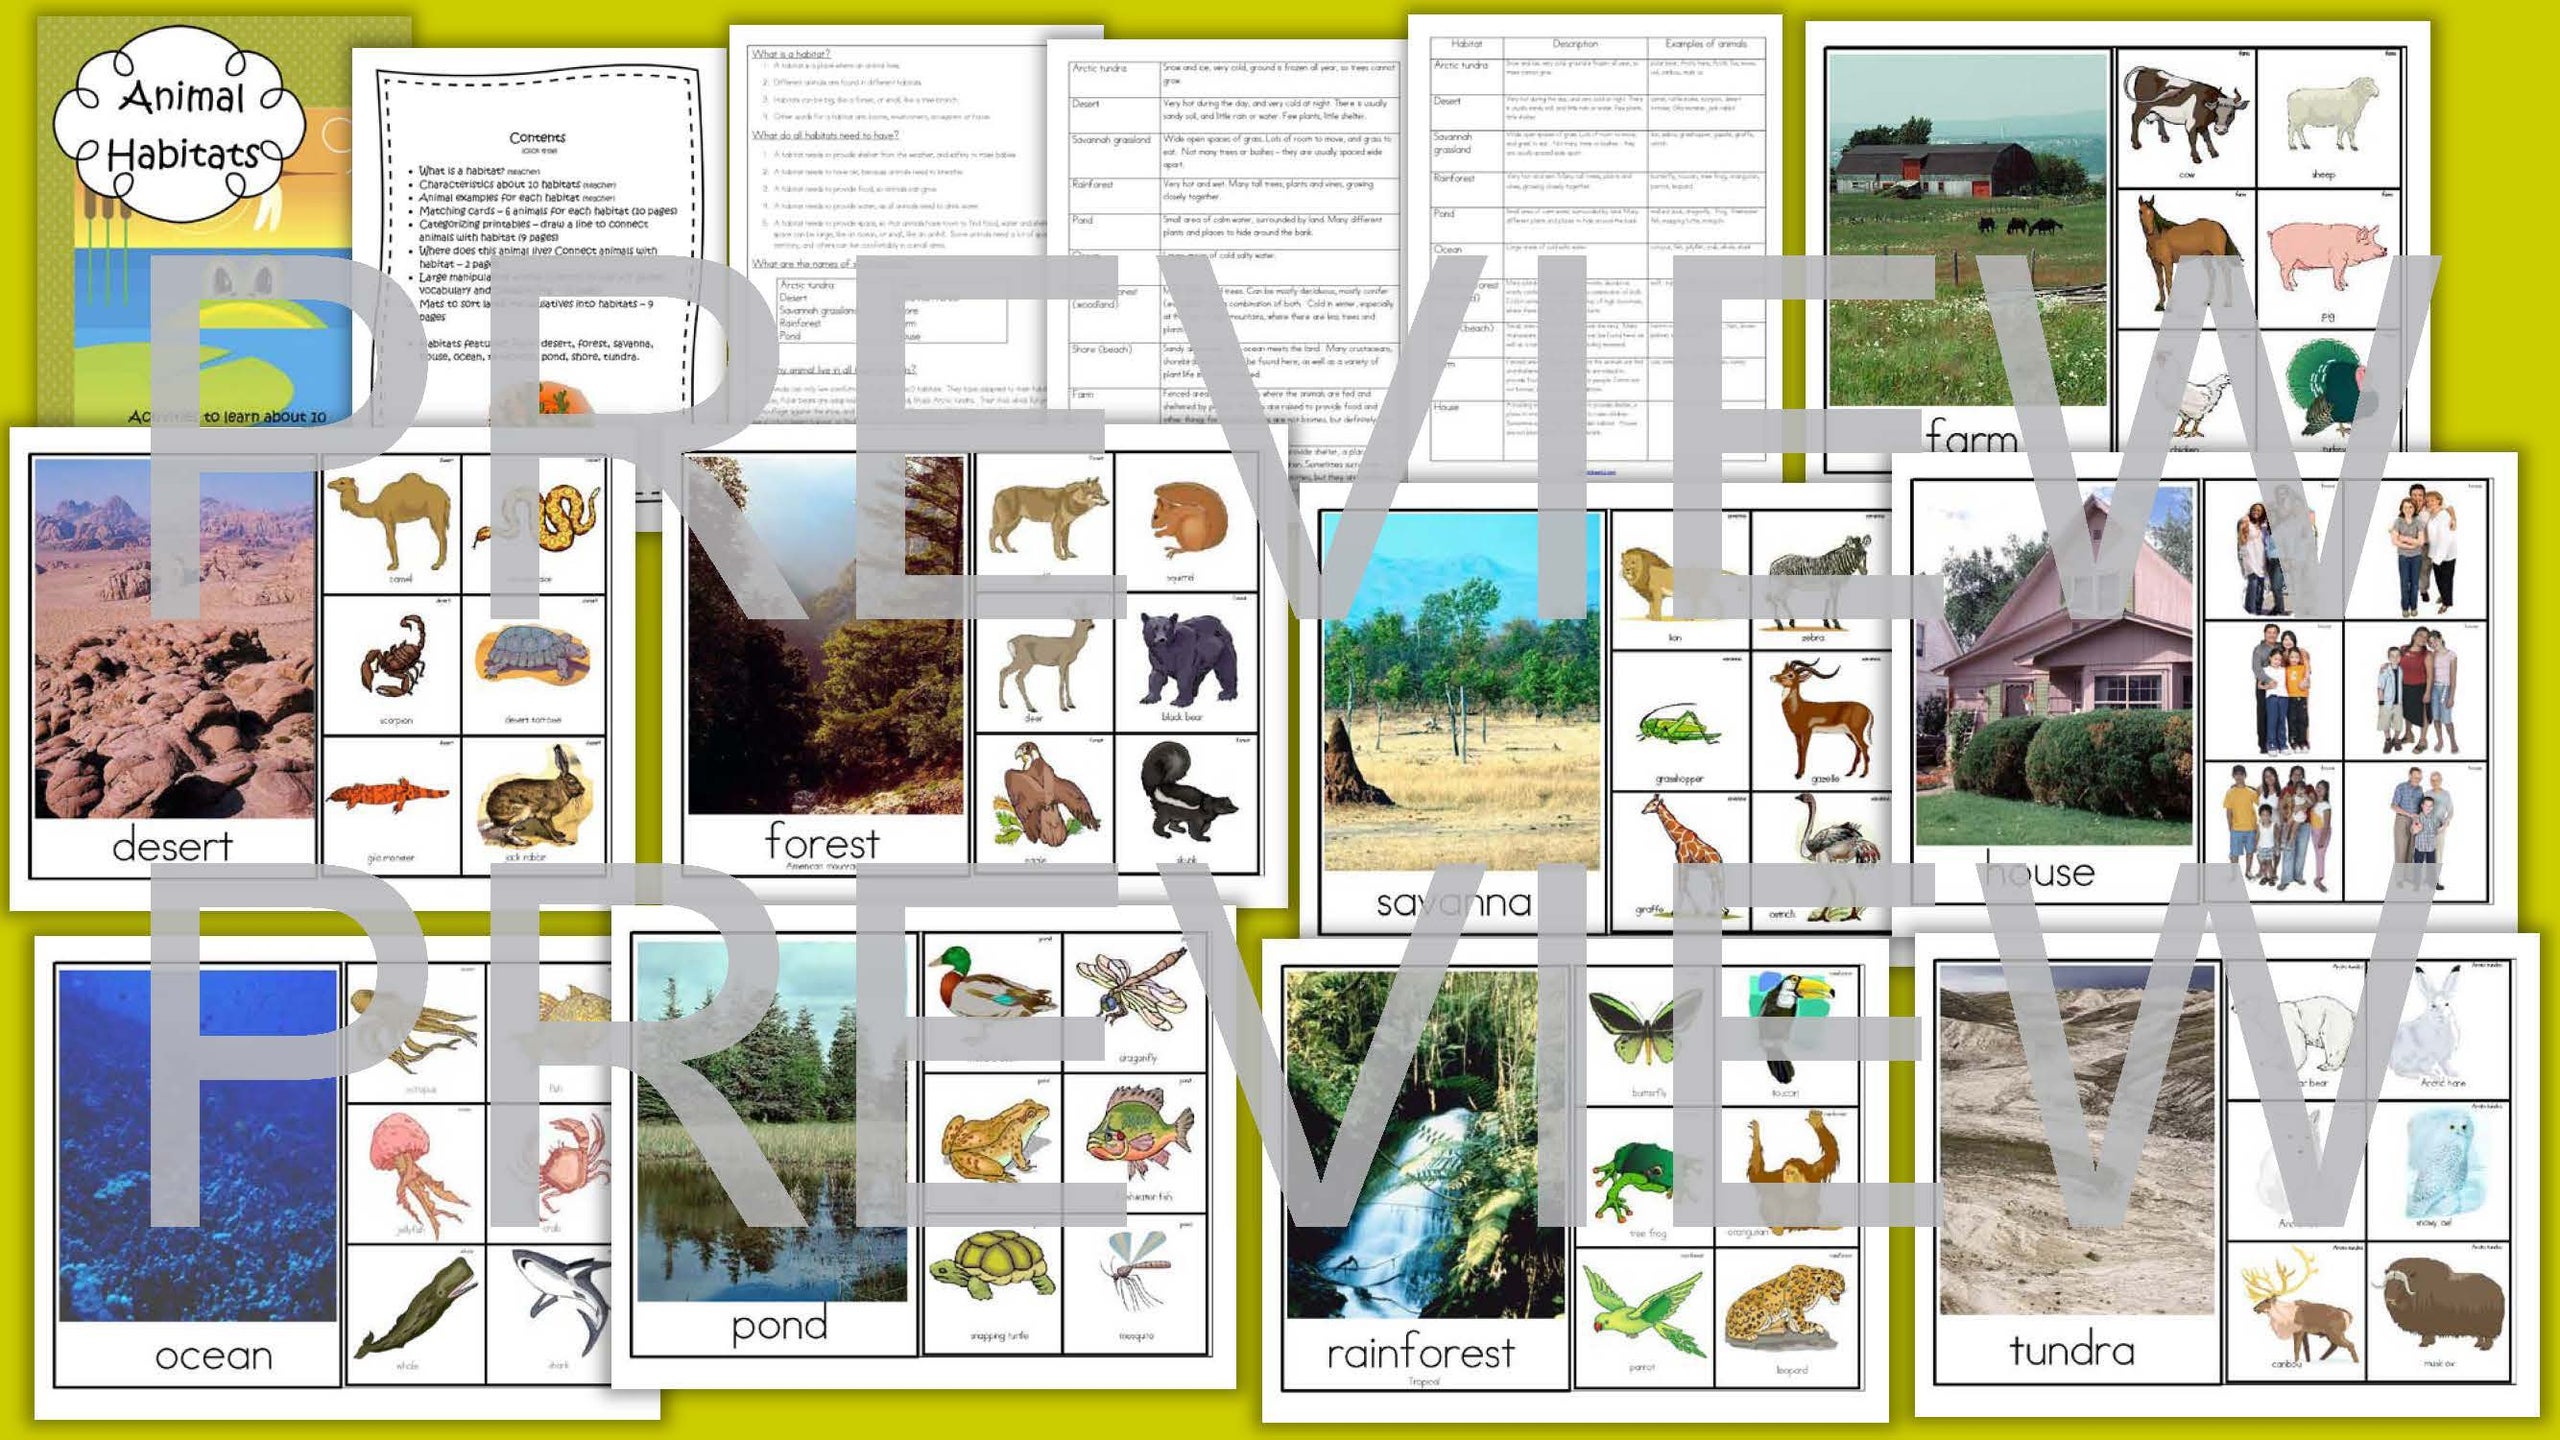 Animal Habitats: Activities for 10 Habitats for Early Learners